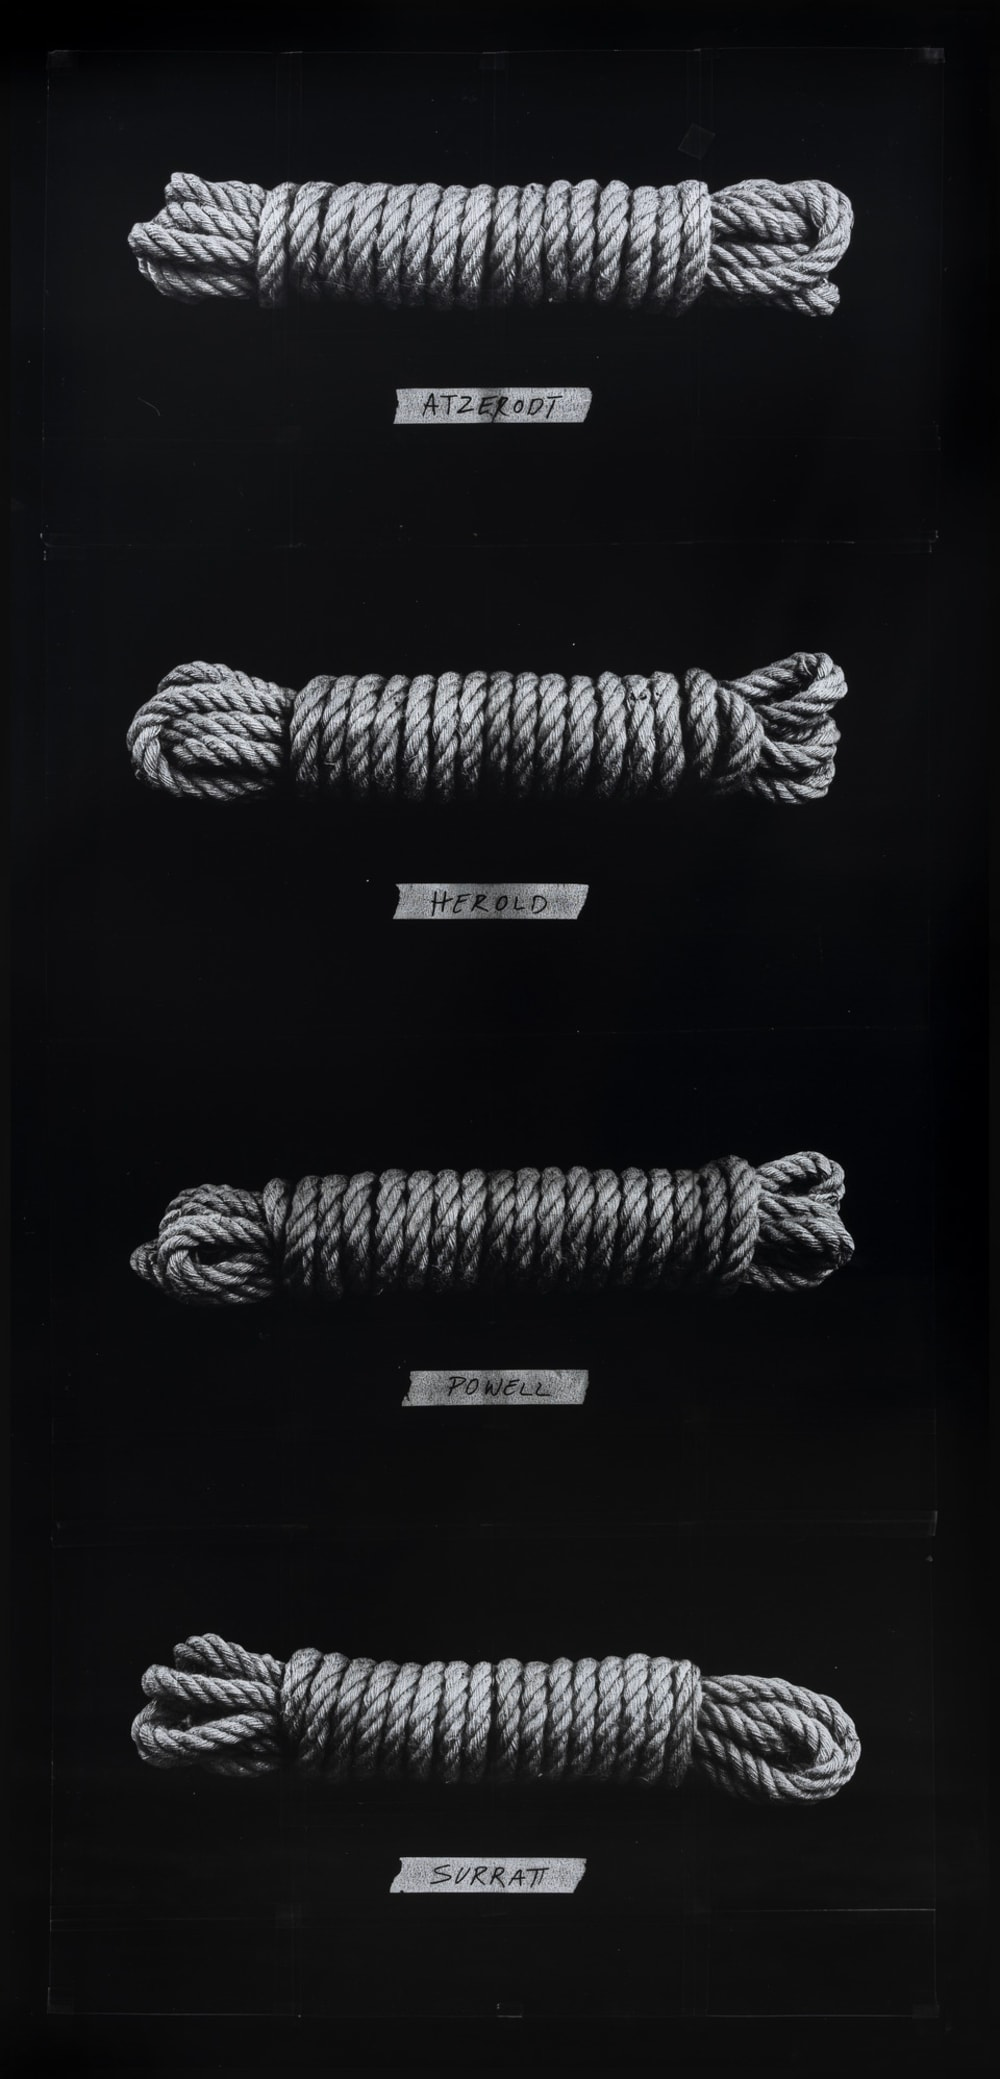 Black and white image of four ropes all knotted in the same storage knot, displayed on top of each other, each with a small handwritten label below.